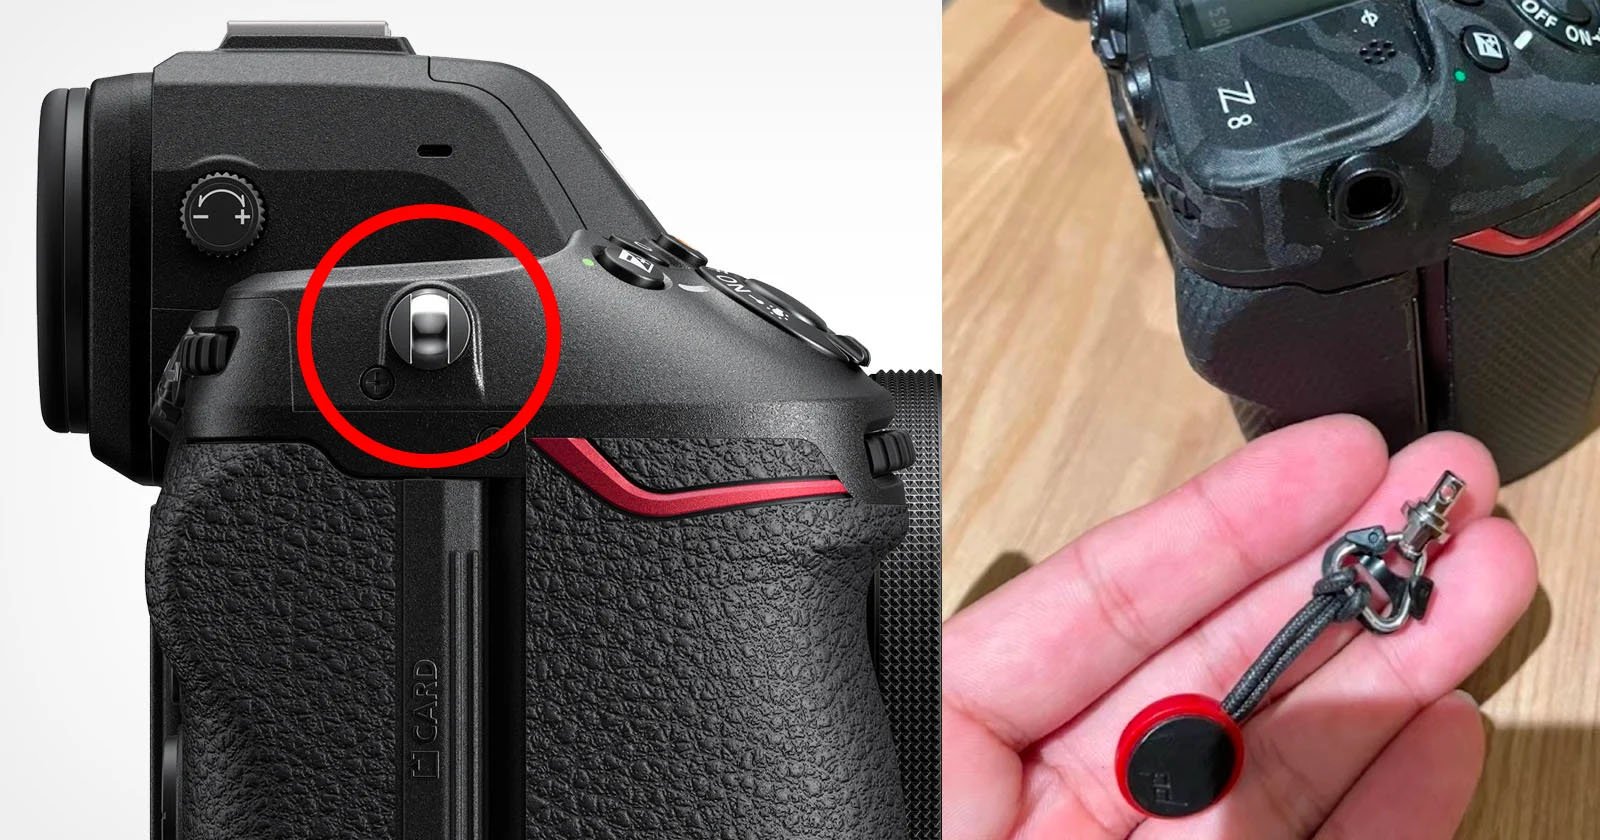 Nikon Issues Service Advisory to Repair Loose Z8 Strap Lugs for Free